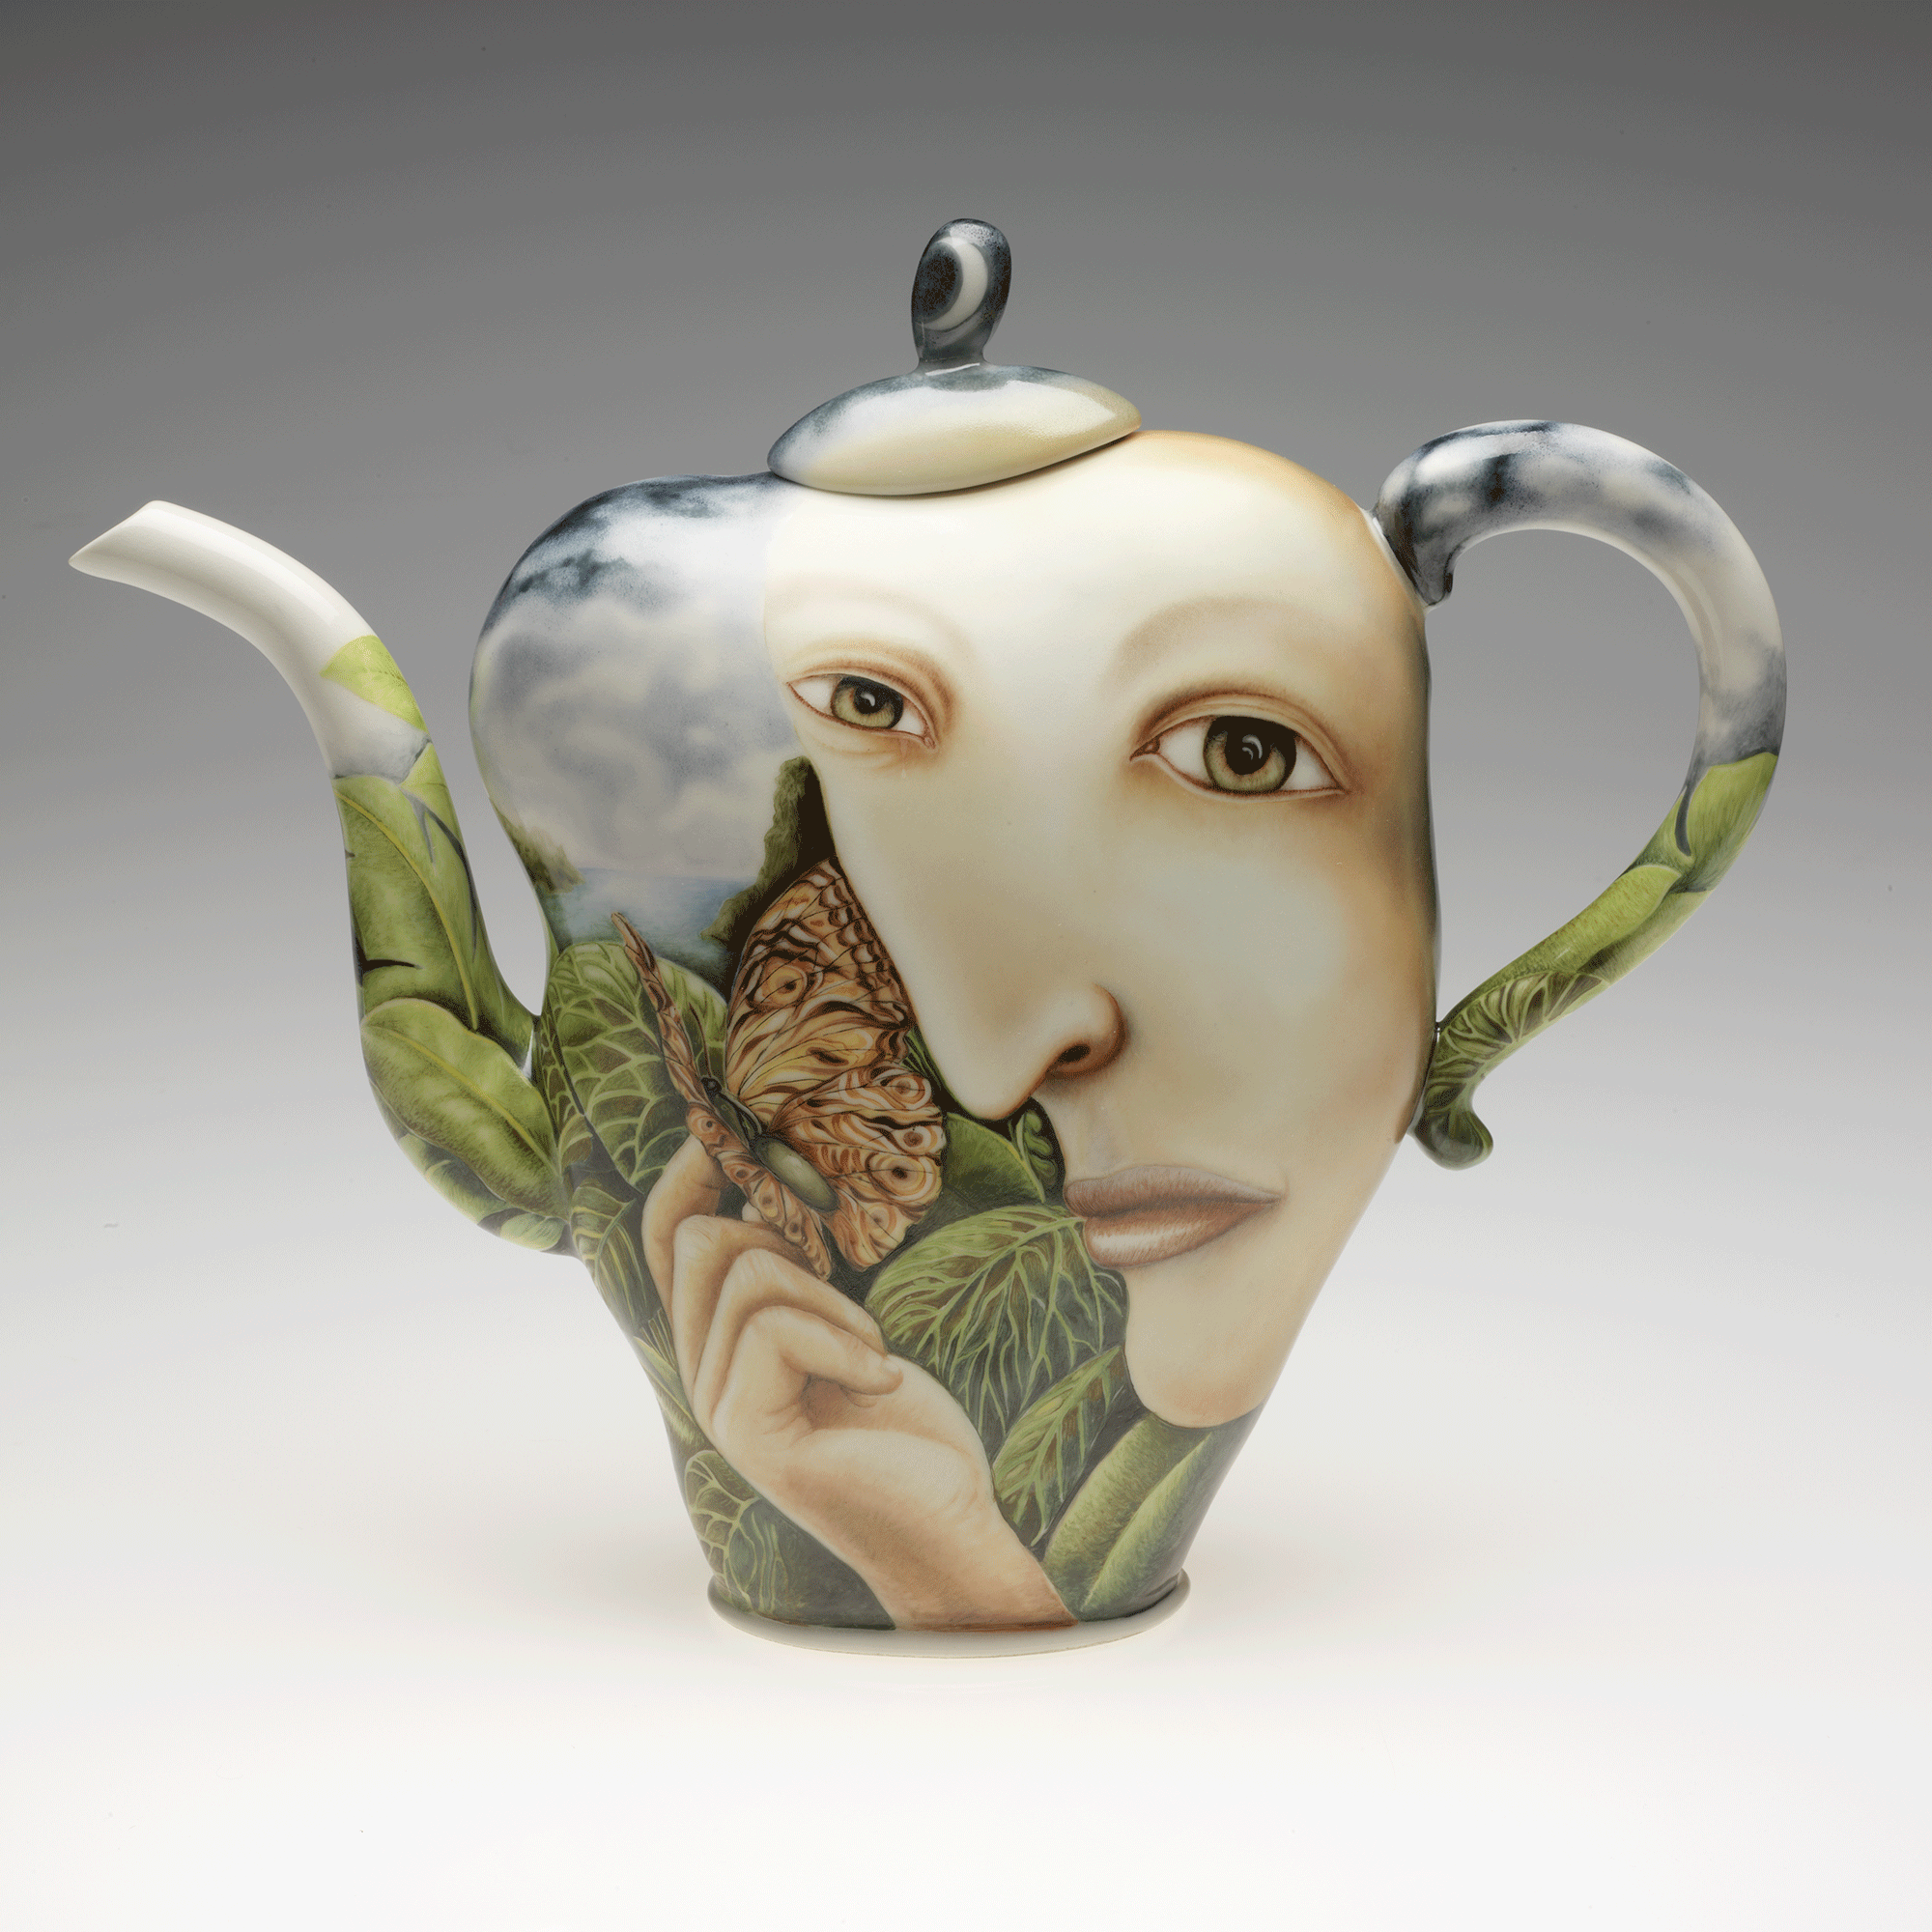 Teapot with spout facing left. It is painted with a large, light-skinned face and hand holding a black and orange butterfly, surrounded by tropical green leaves and cloudy blue sky